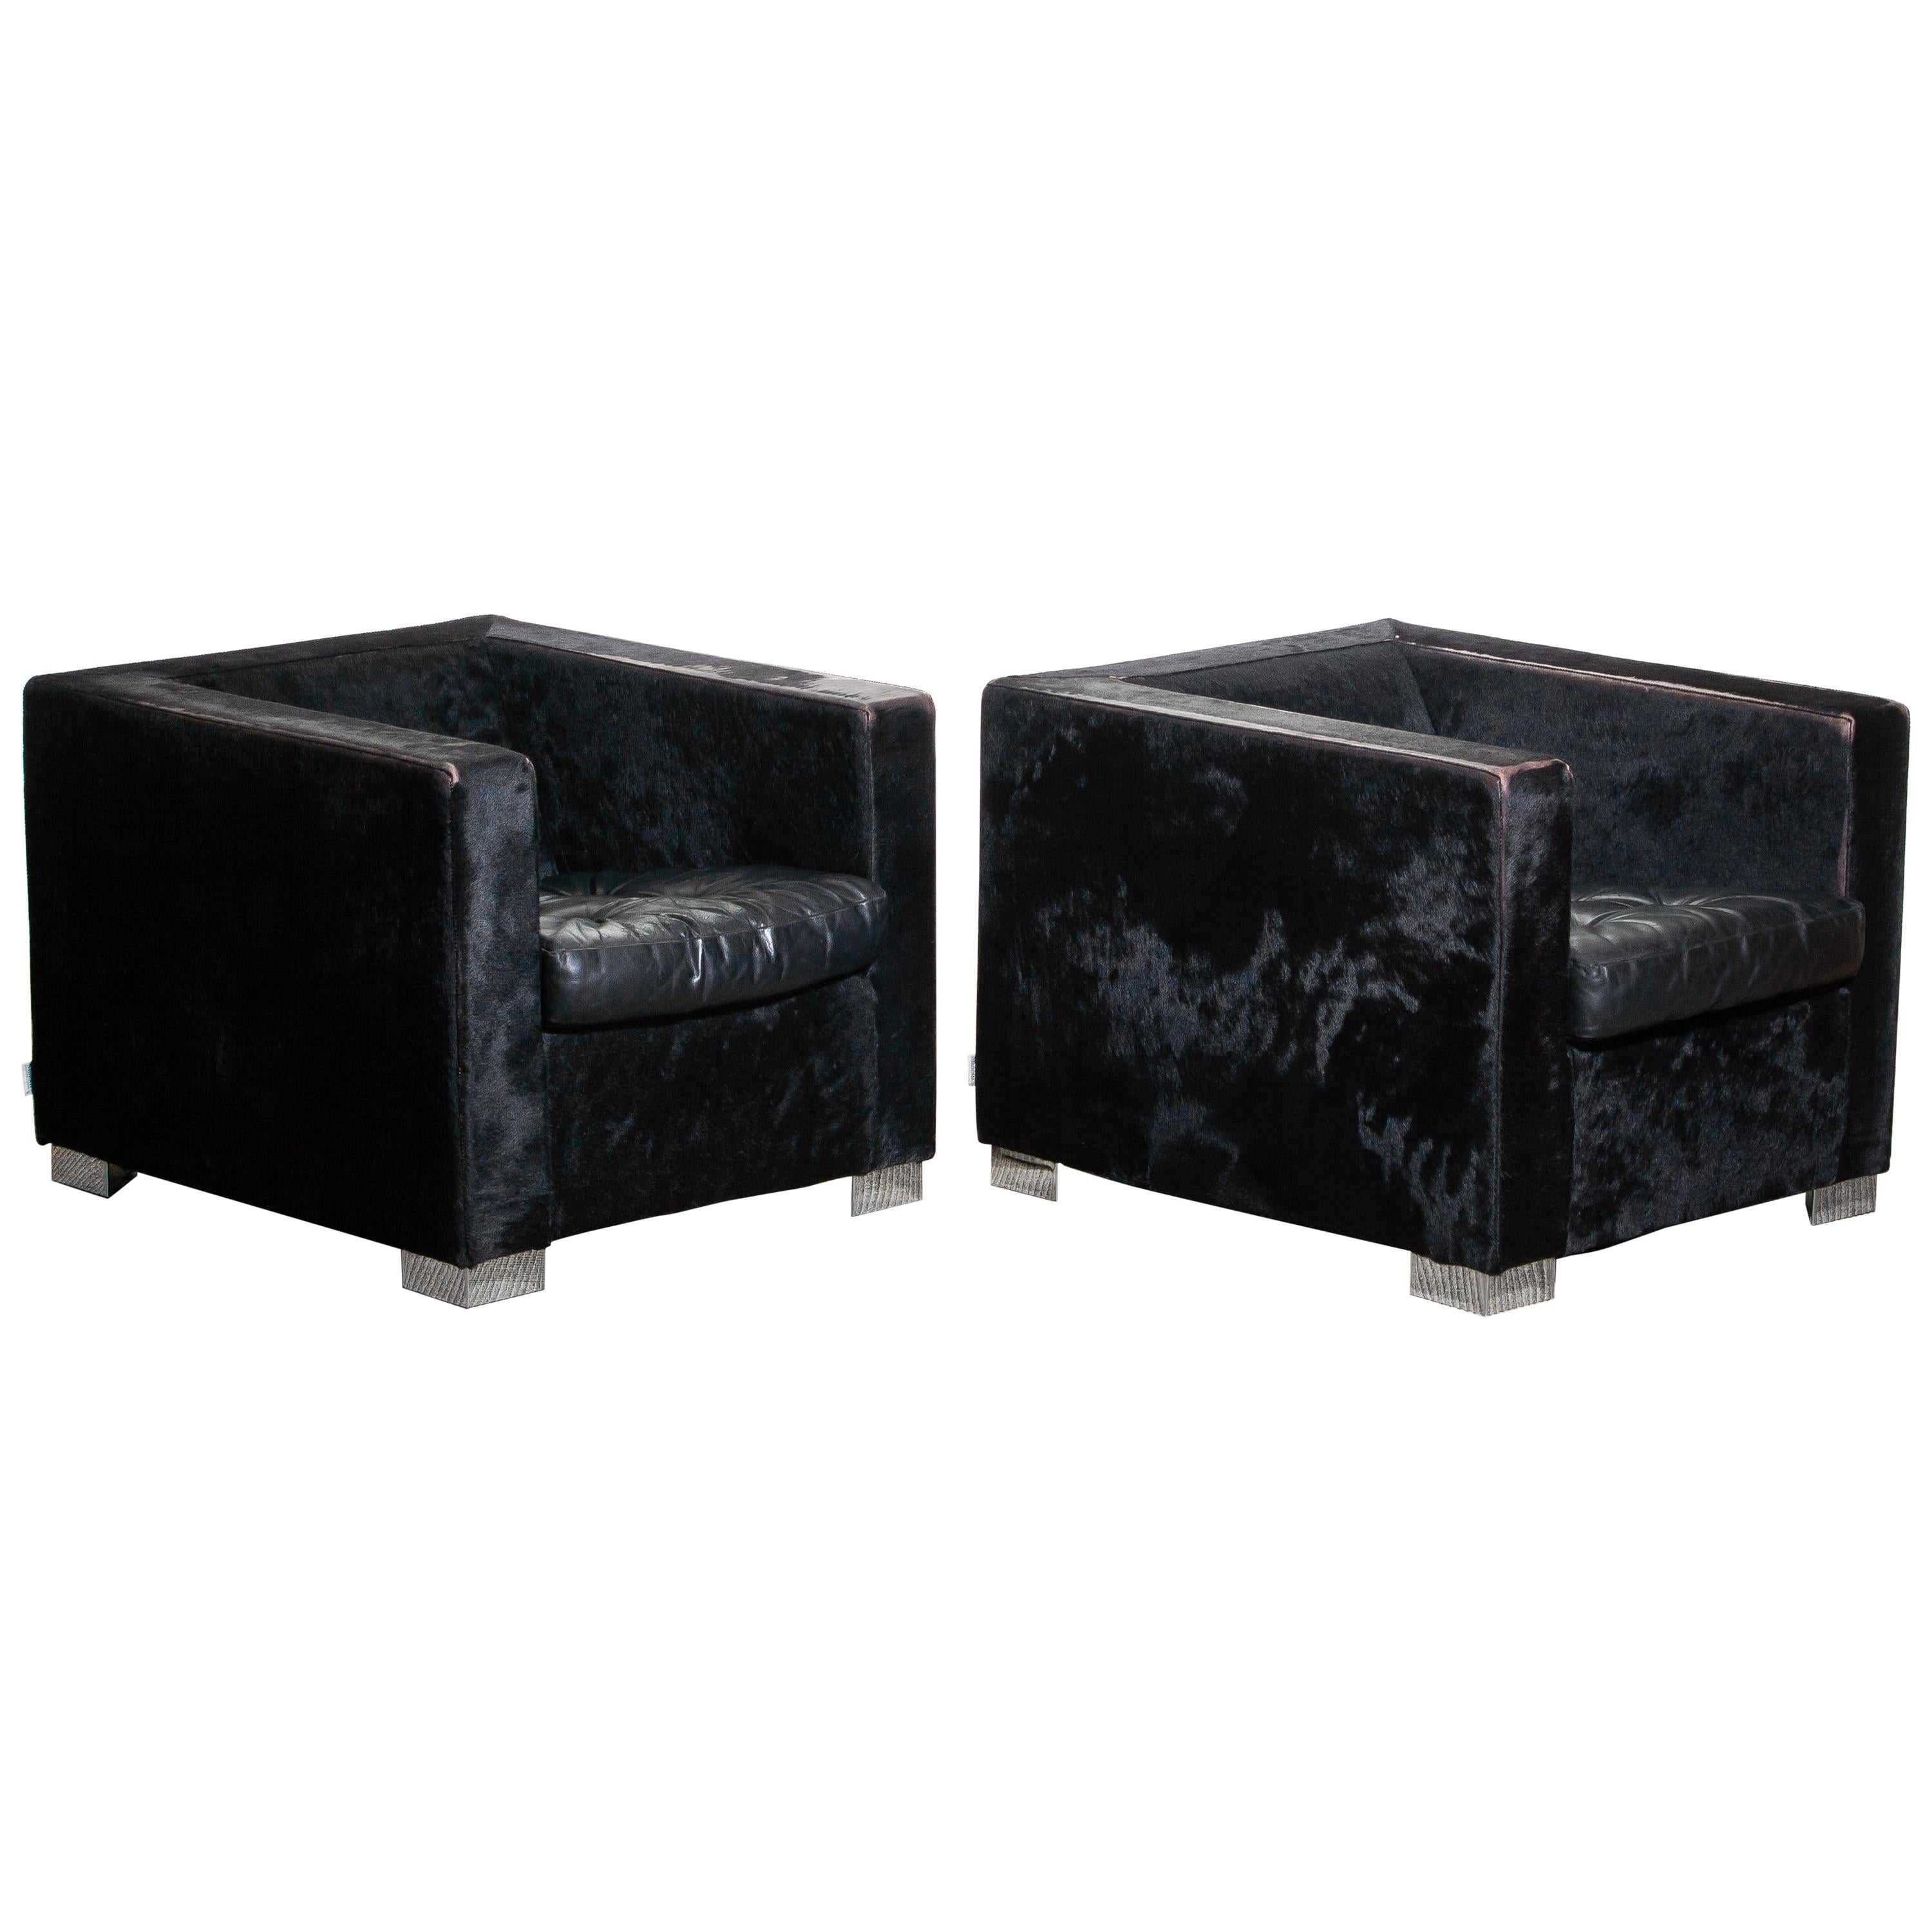 Late 20th Century 1990s Pair of Black Rodolfo Dordoni for Minotti Club Chairs in Pony and Leather